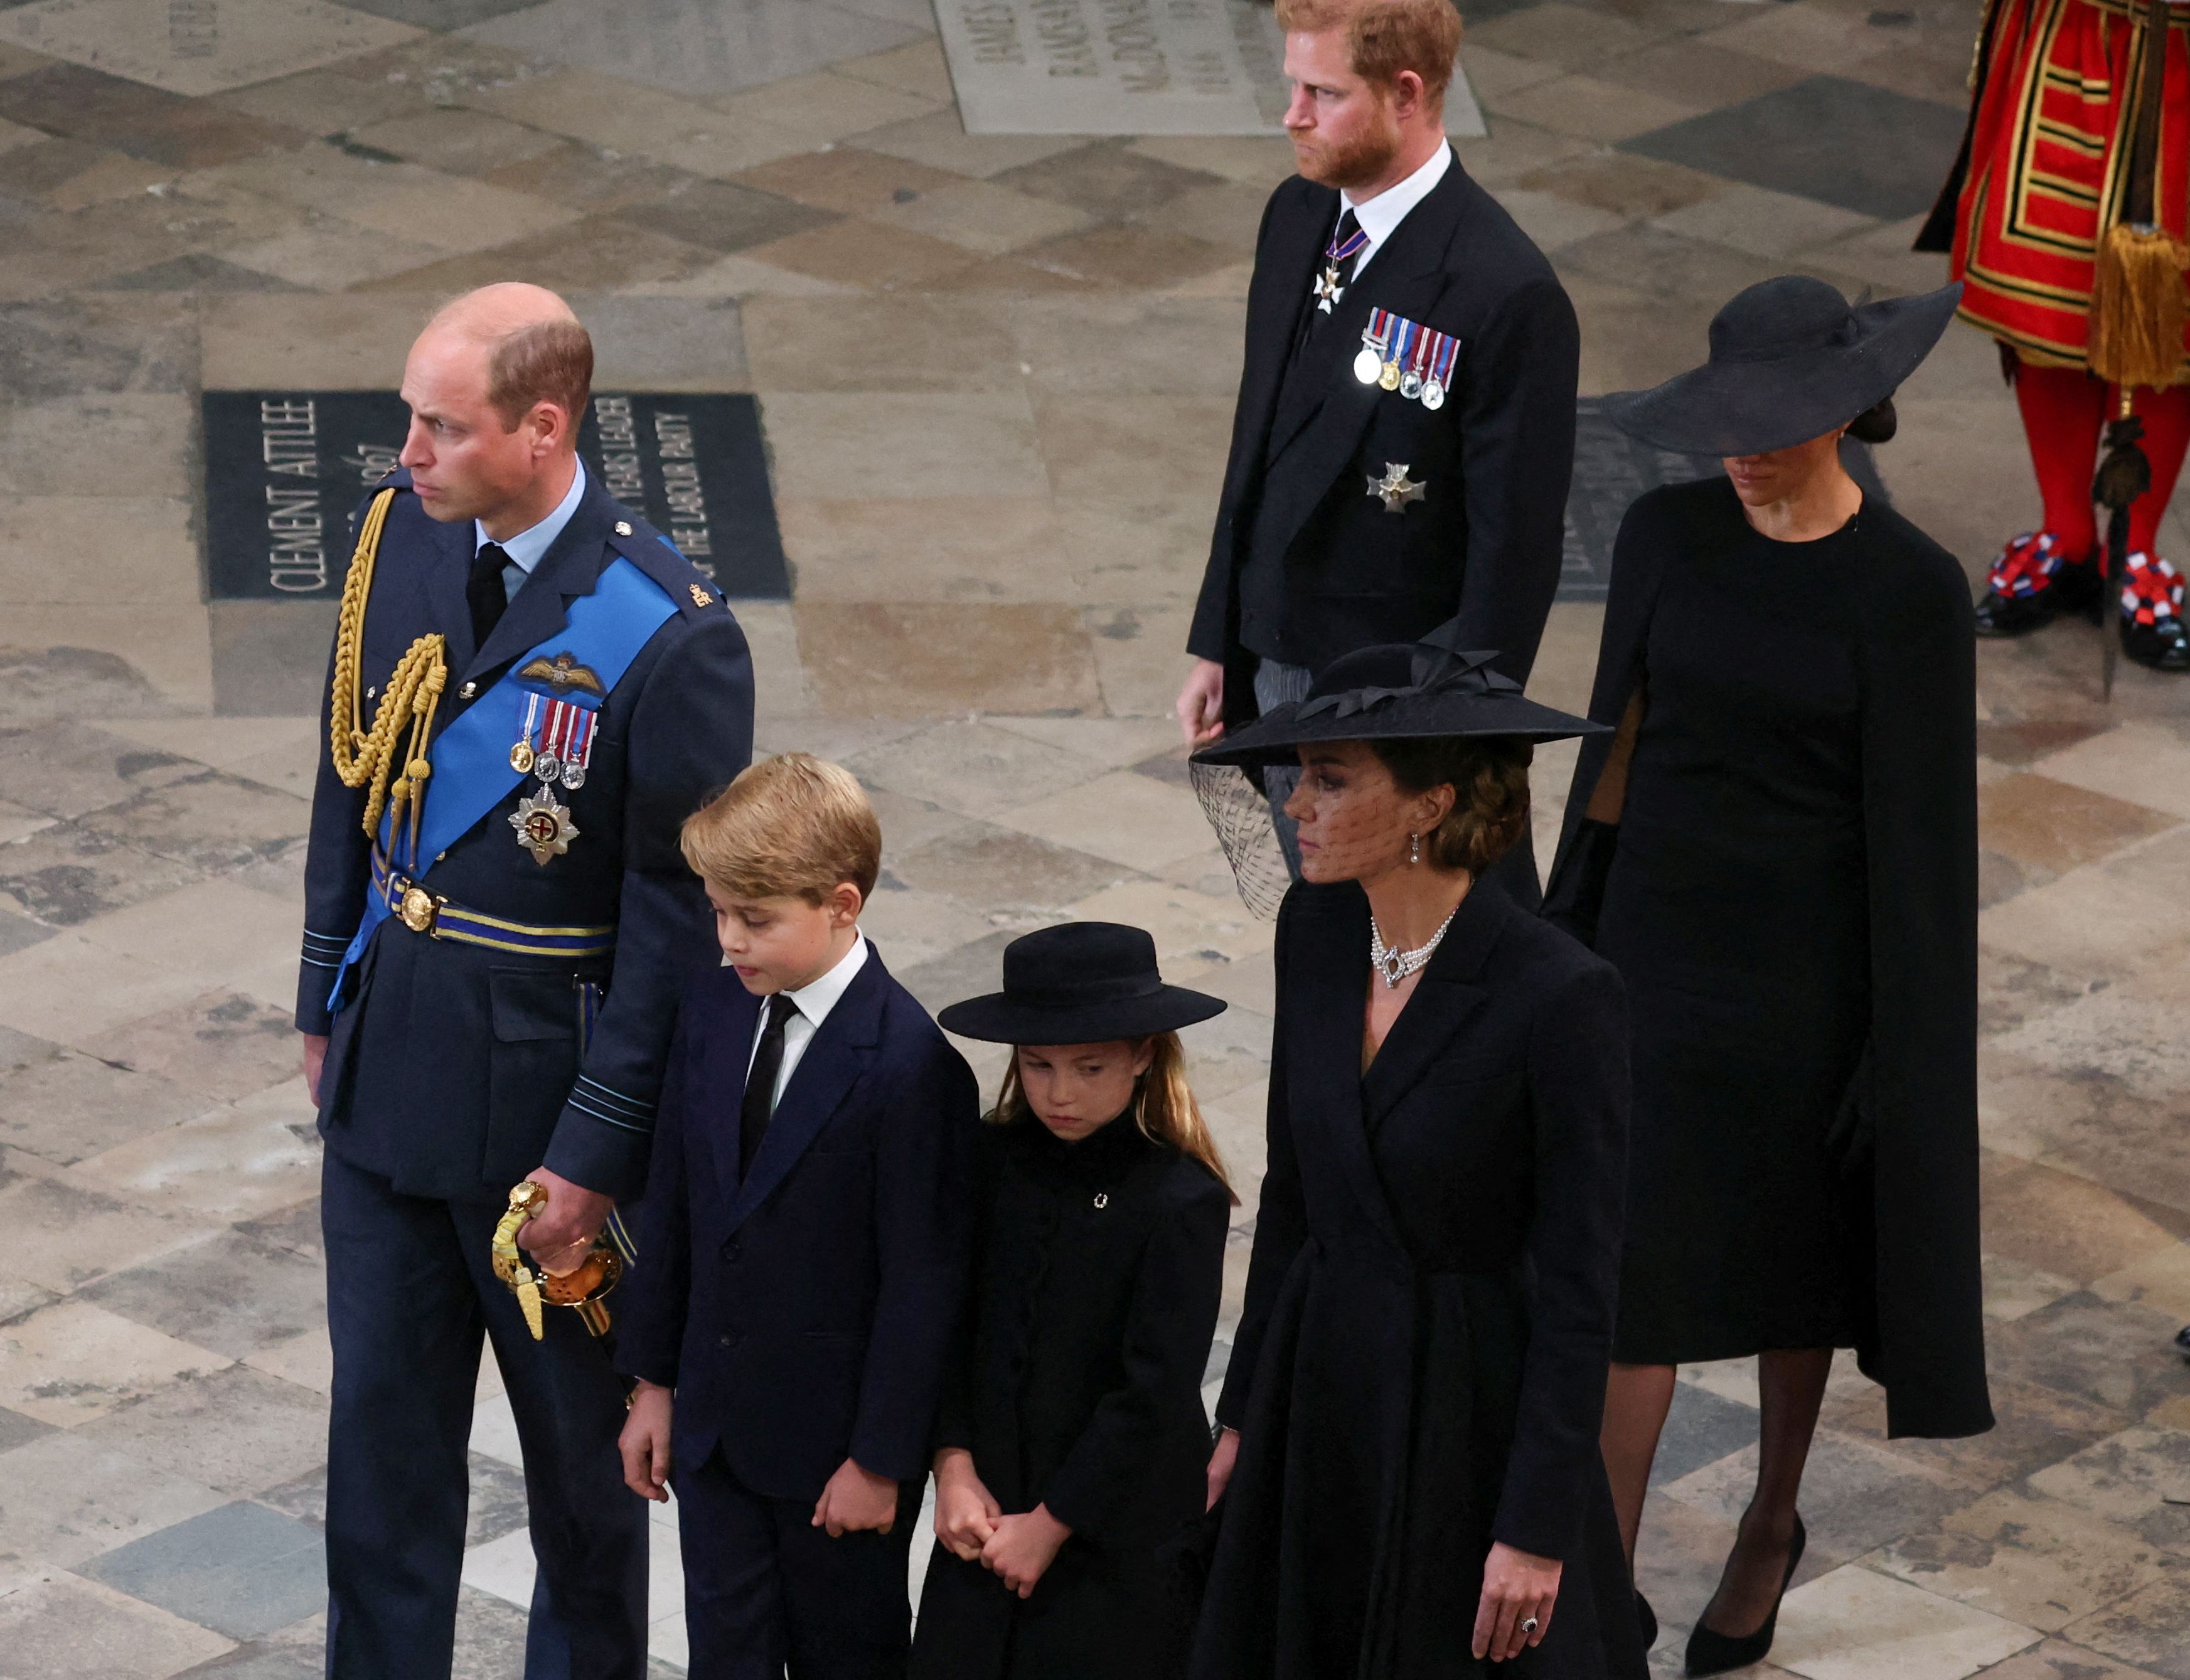 Prince William, Prince George, Princess Charlotte, Princess Kate, Prince Harry and Duchess Meghan at Queen Elizabeth II's state funeral and interment at Westminster Abbey in London, Britain, on September 19 from 2022 |  Source: Getty Images